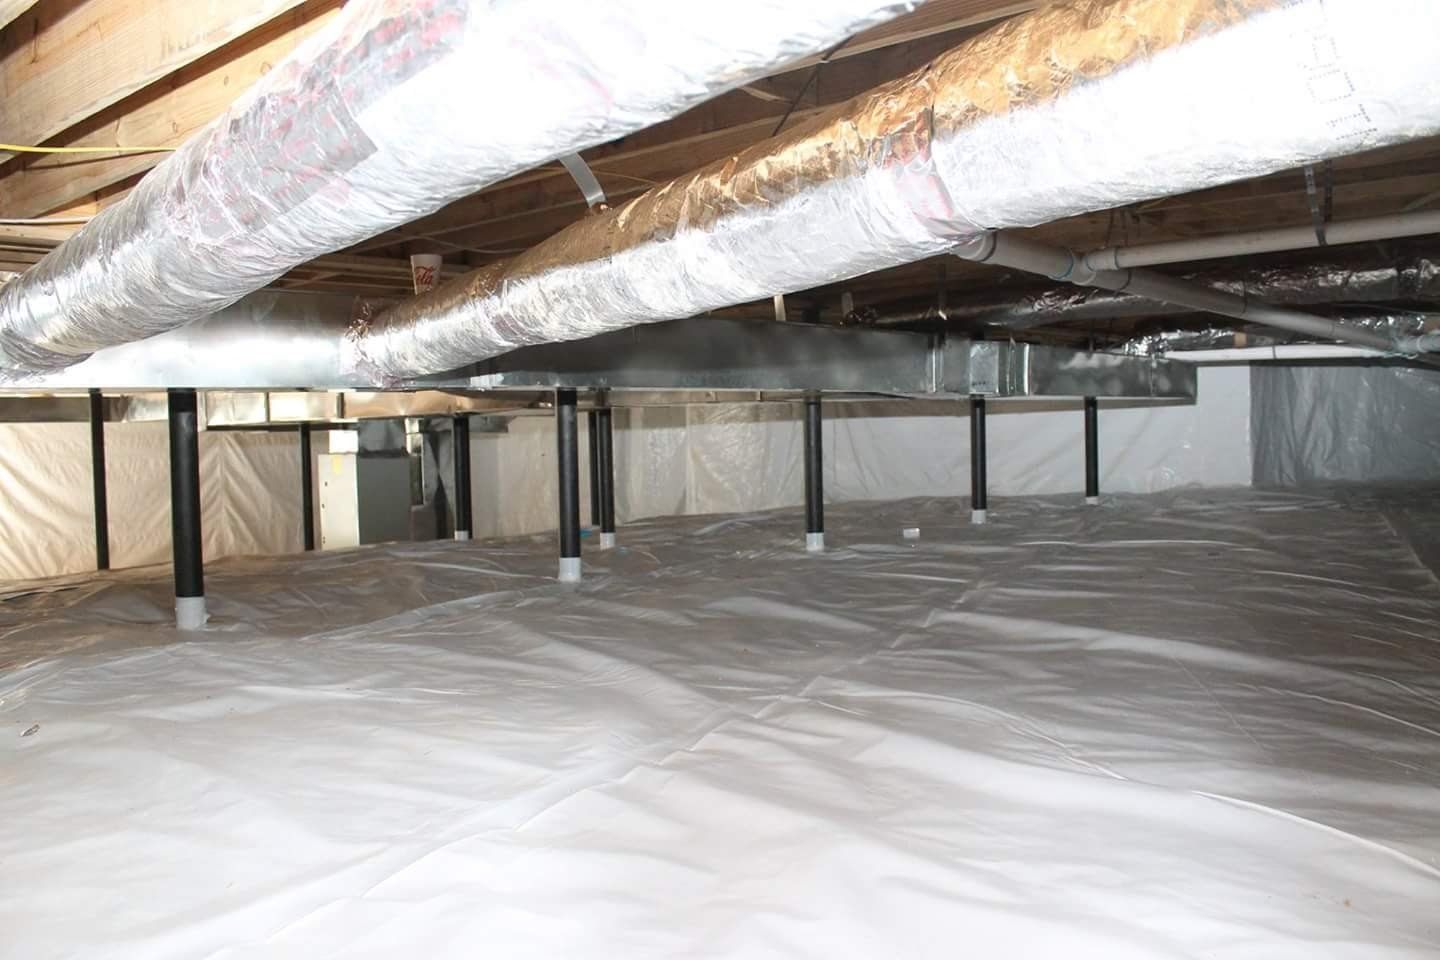 Crawl space encapsulation with a vapor barrier in a homes crawl space